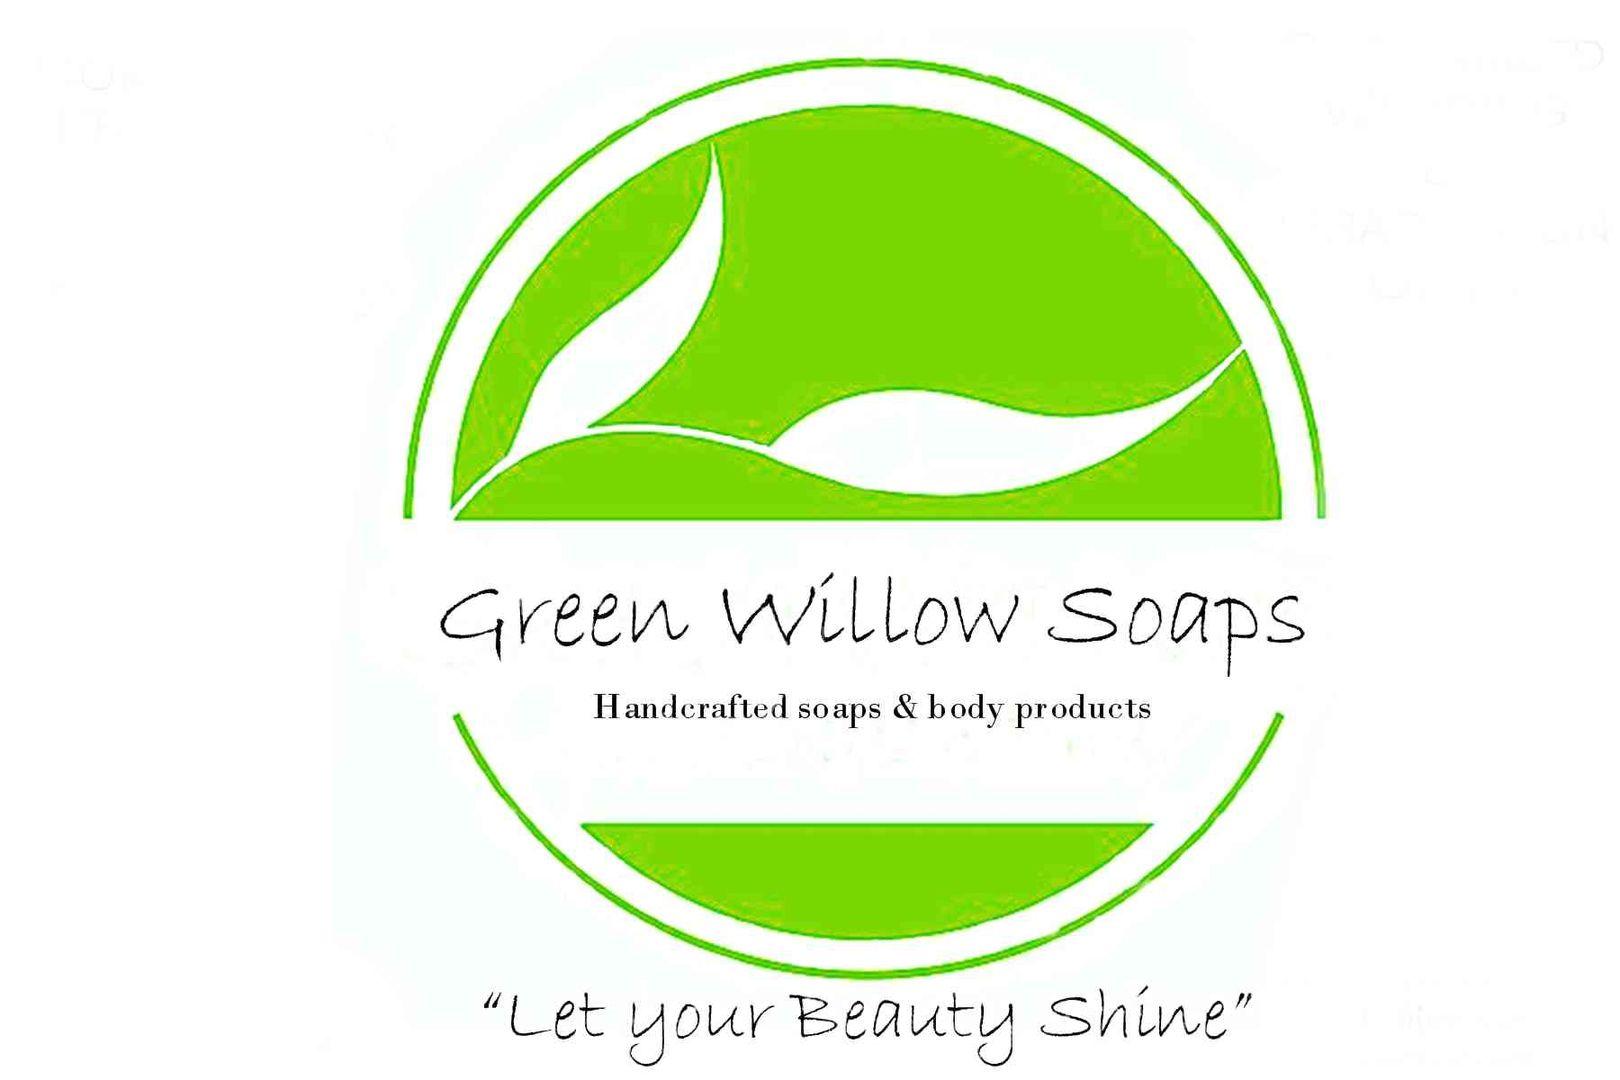 Greenwillow Logo - Green Willow Soap - Handcrafted Soaps & Body Products, Body Products